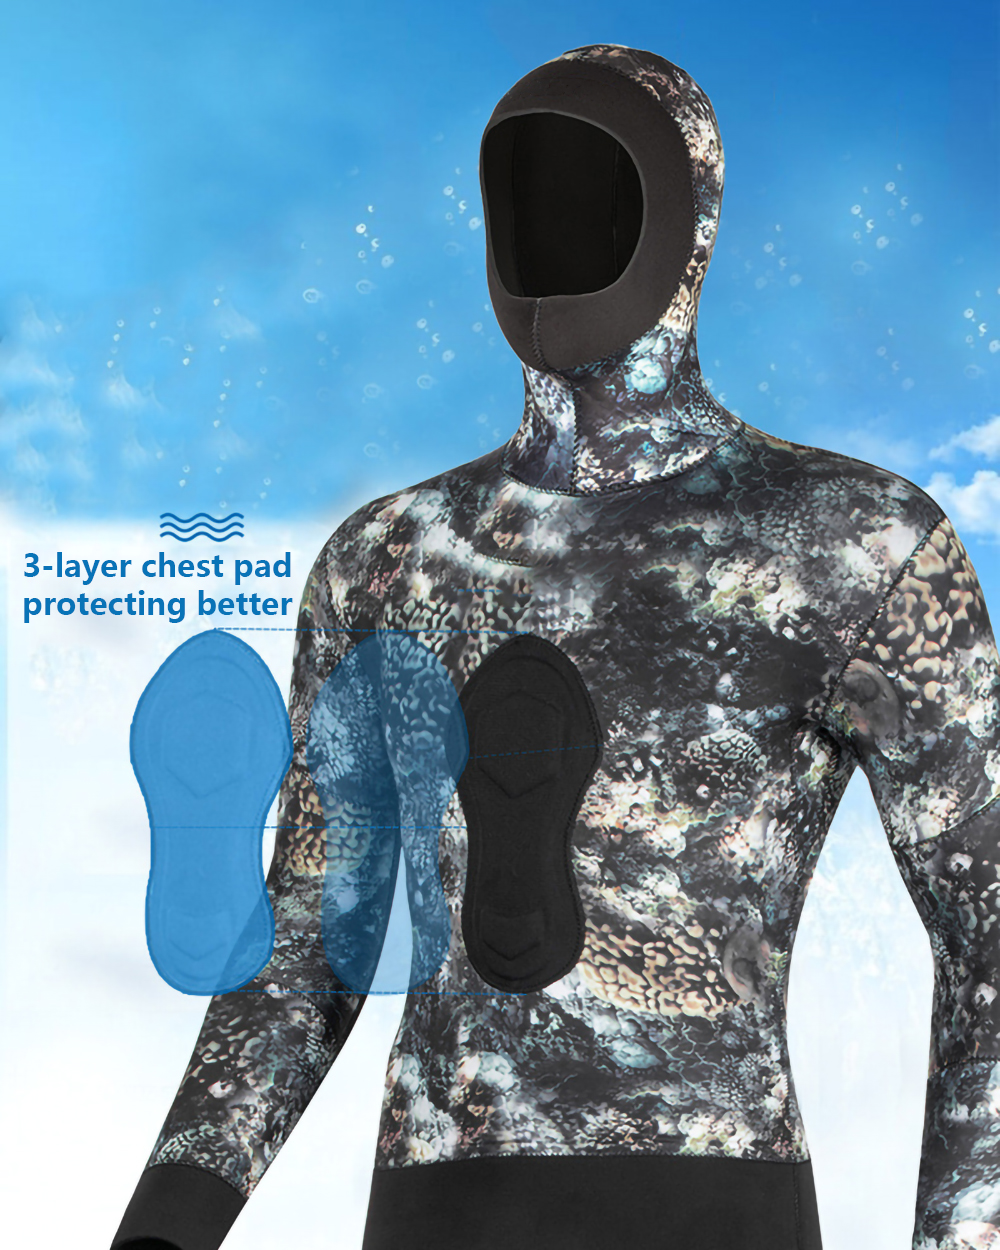 Wetsuit feature - What is the chest pad?cid=16